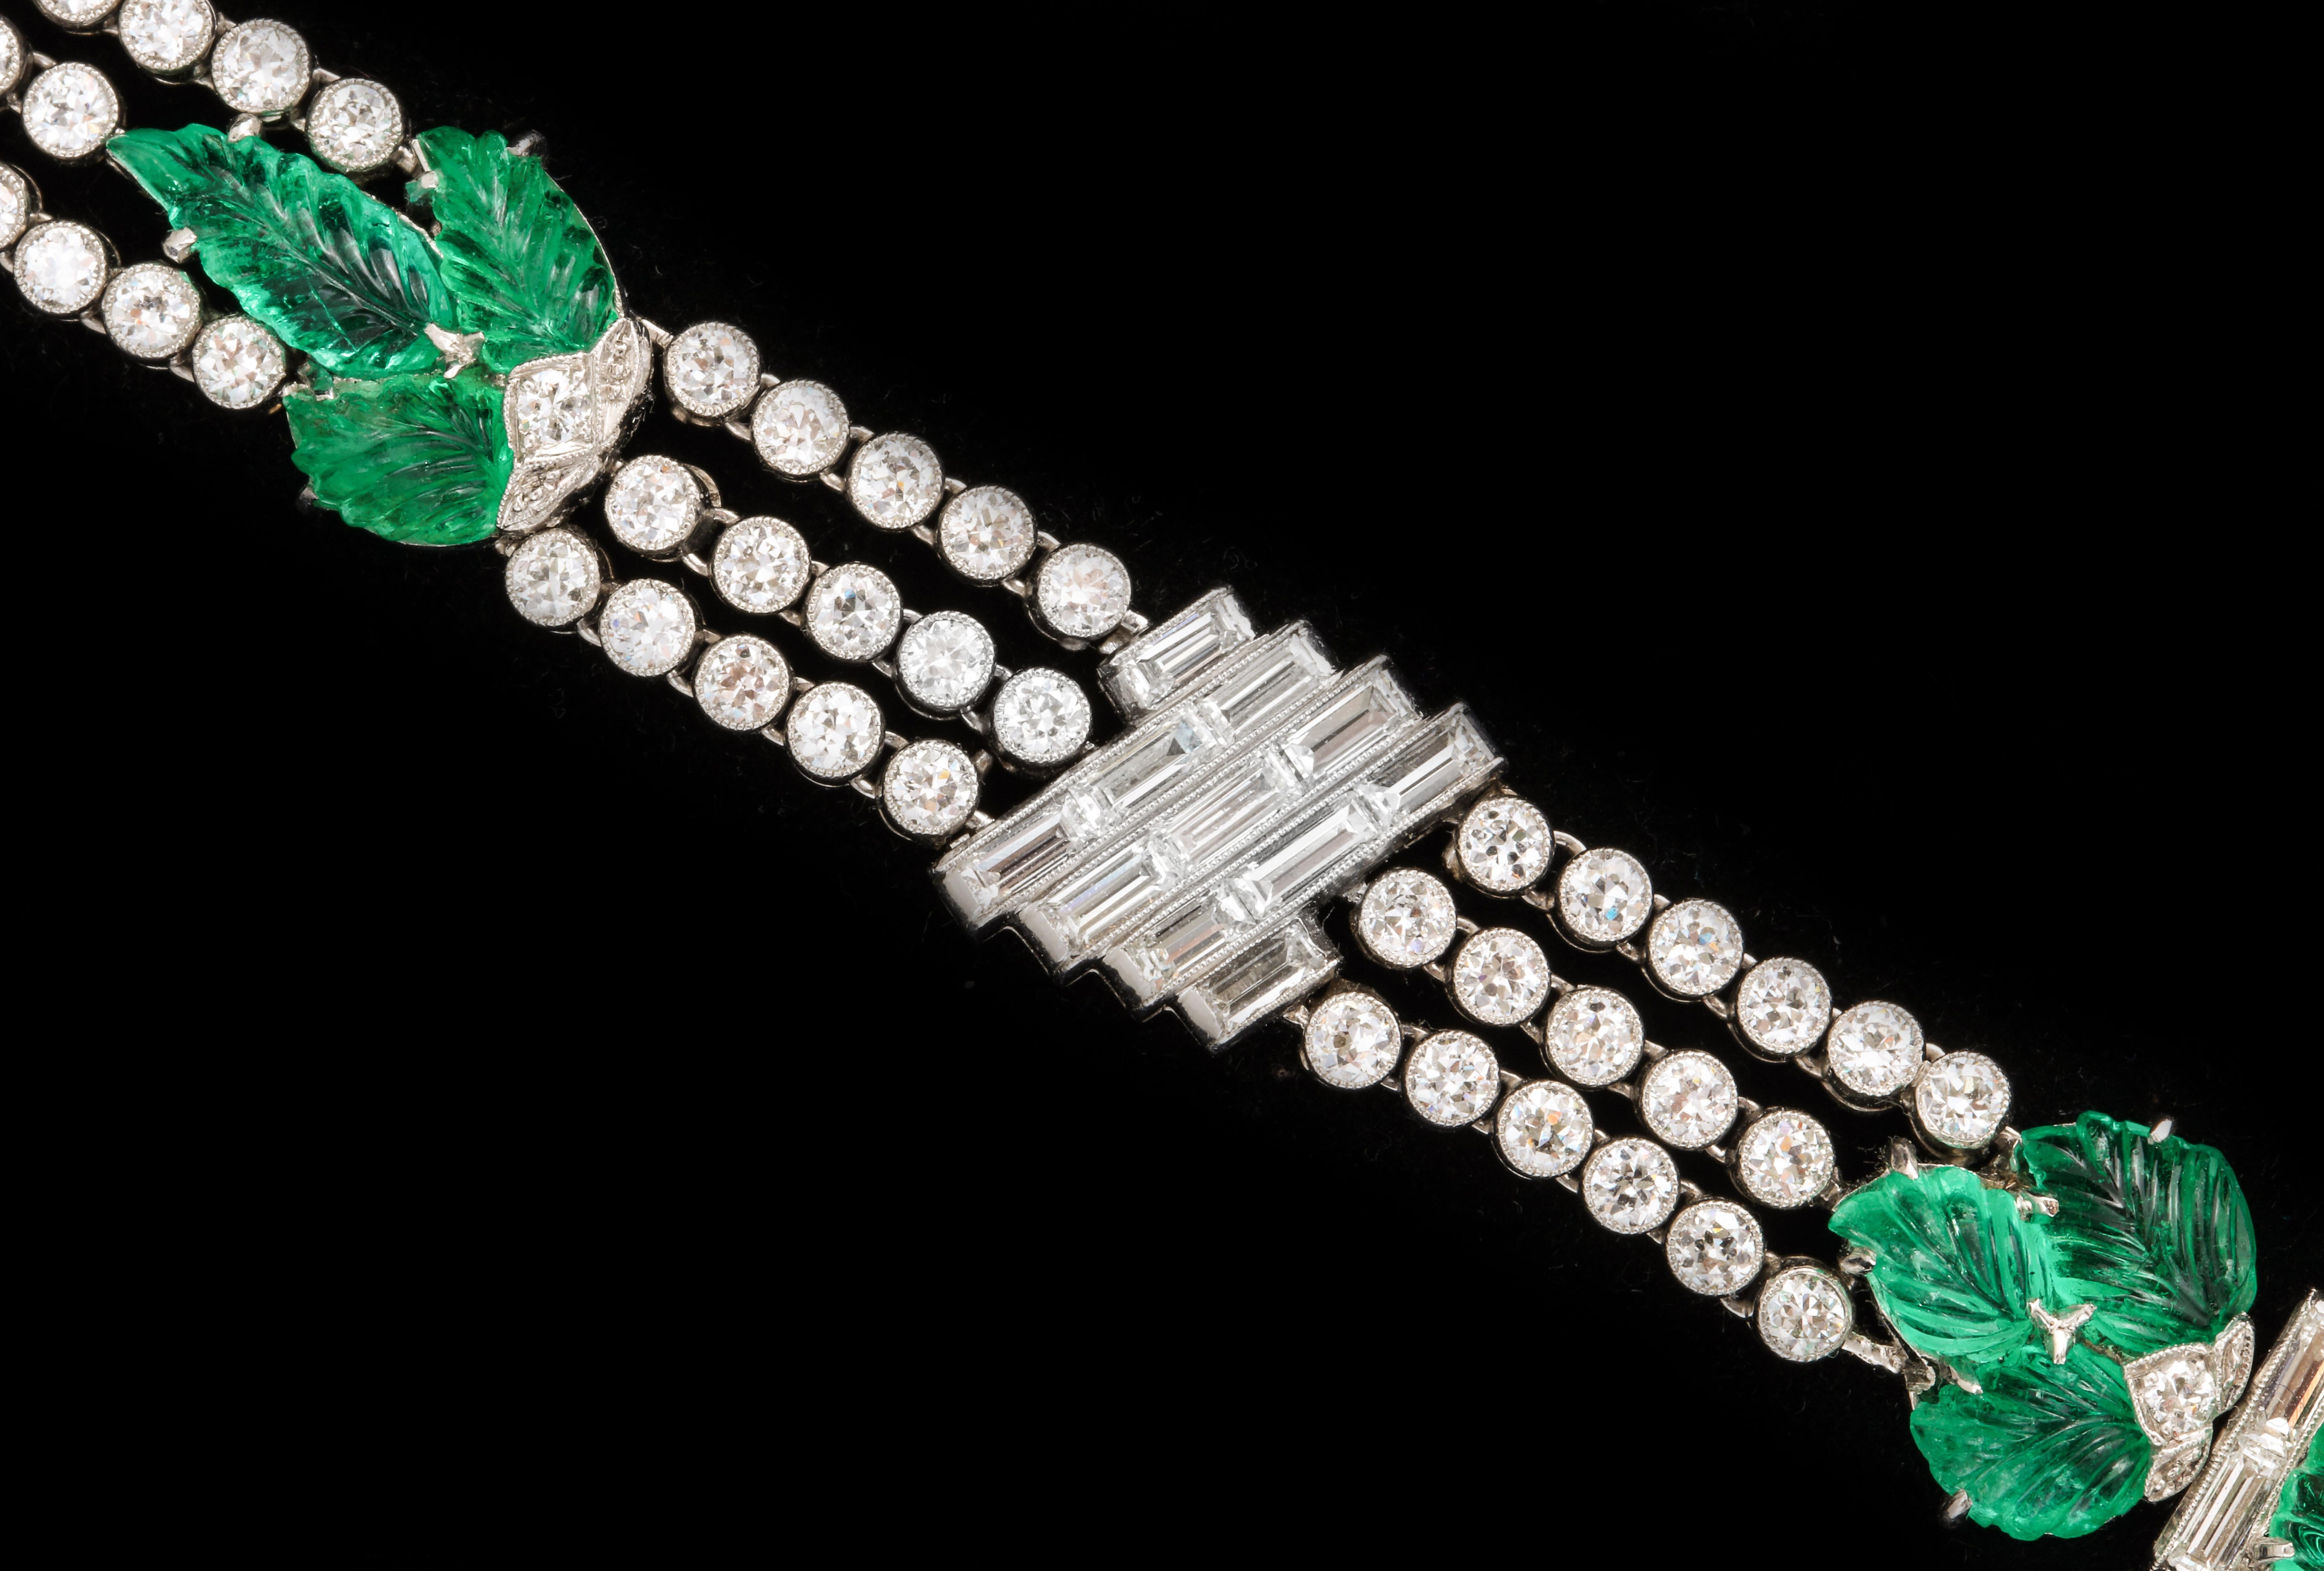 A flexible bracelet with emeralds carved to a leaf design underscored by round and baguette diamonds (approximately 9 carats) circa 1930. 

Provenance:

1. From the collection of Matilda Dodge Wilson

2. Depicted in full page spread in the 